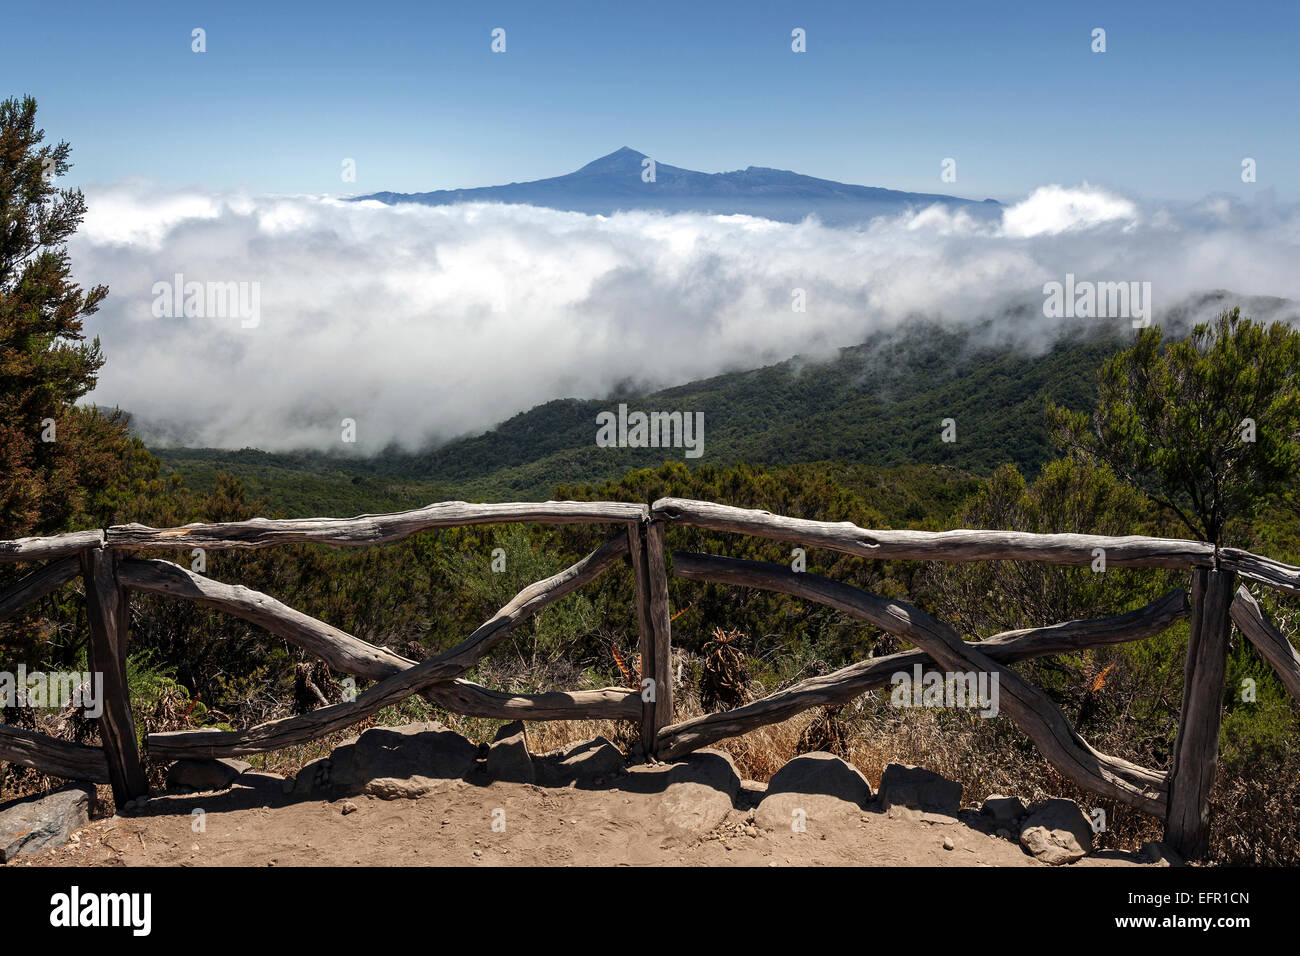 View from below the Garajonay onto Bosque del Cedro, Passat clouds and Mount Teide on Tenerife, La Gomera, Canary Islands, Spain Stock Photo